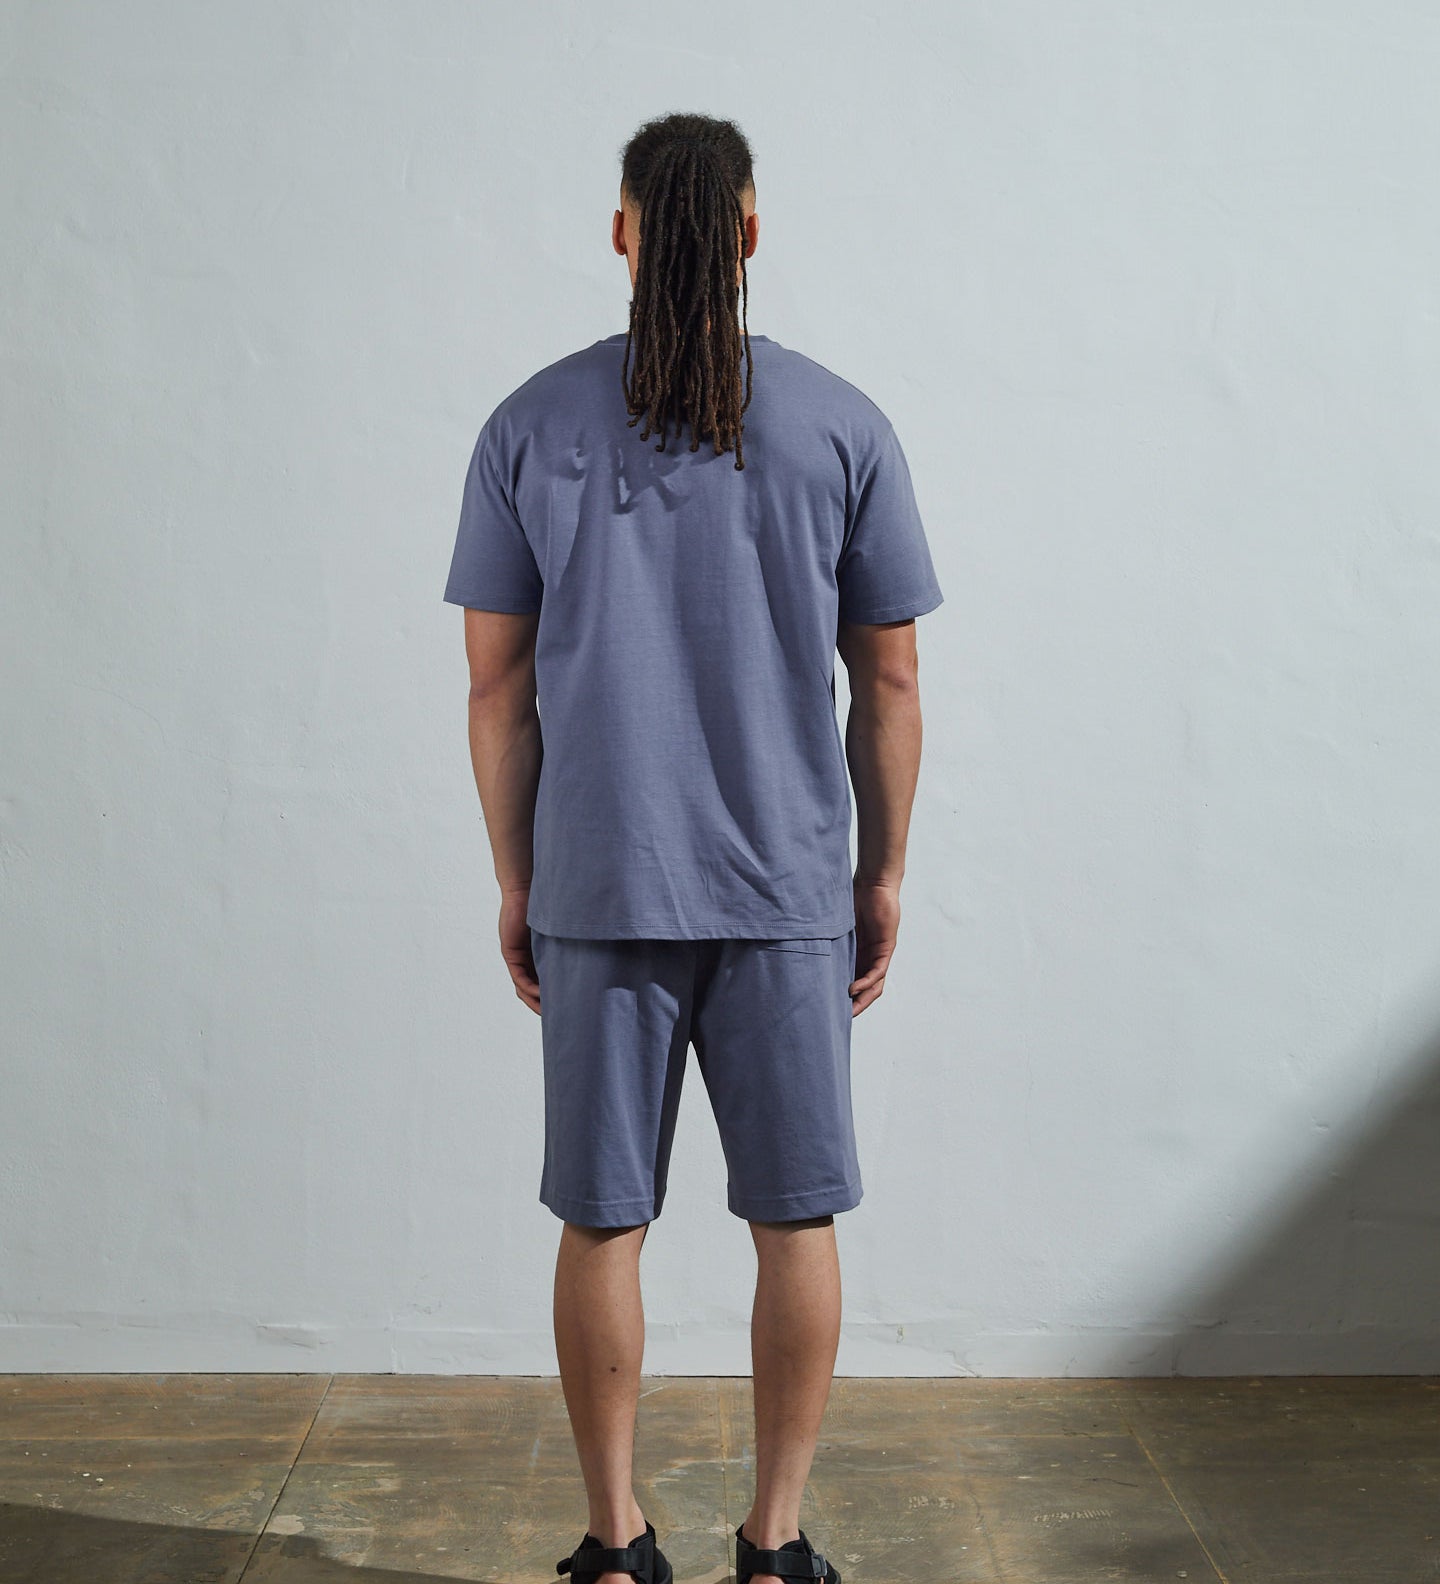 Full-length back view of model wearing teal, relaxed cut organic cotton #7006 jersey T-shirt by Uskees paired with matching #7007 shorts.